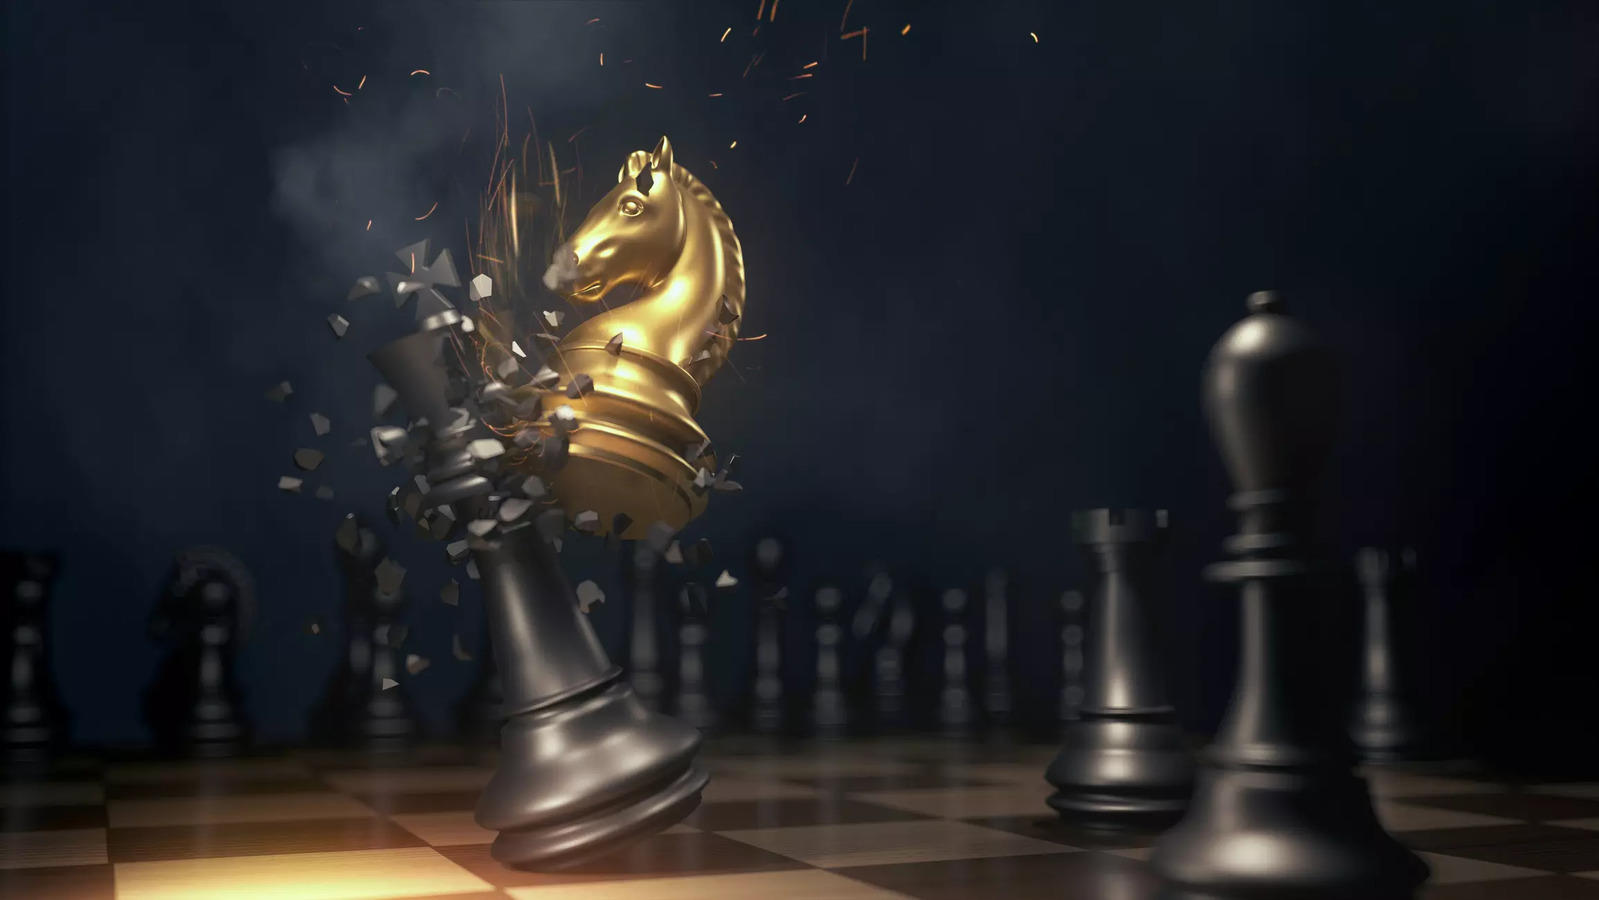 Checkmate! Life Lessons from Chess – Check My Universe